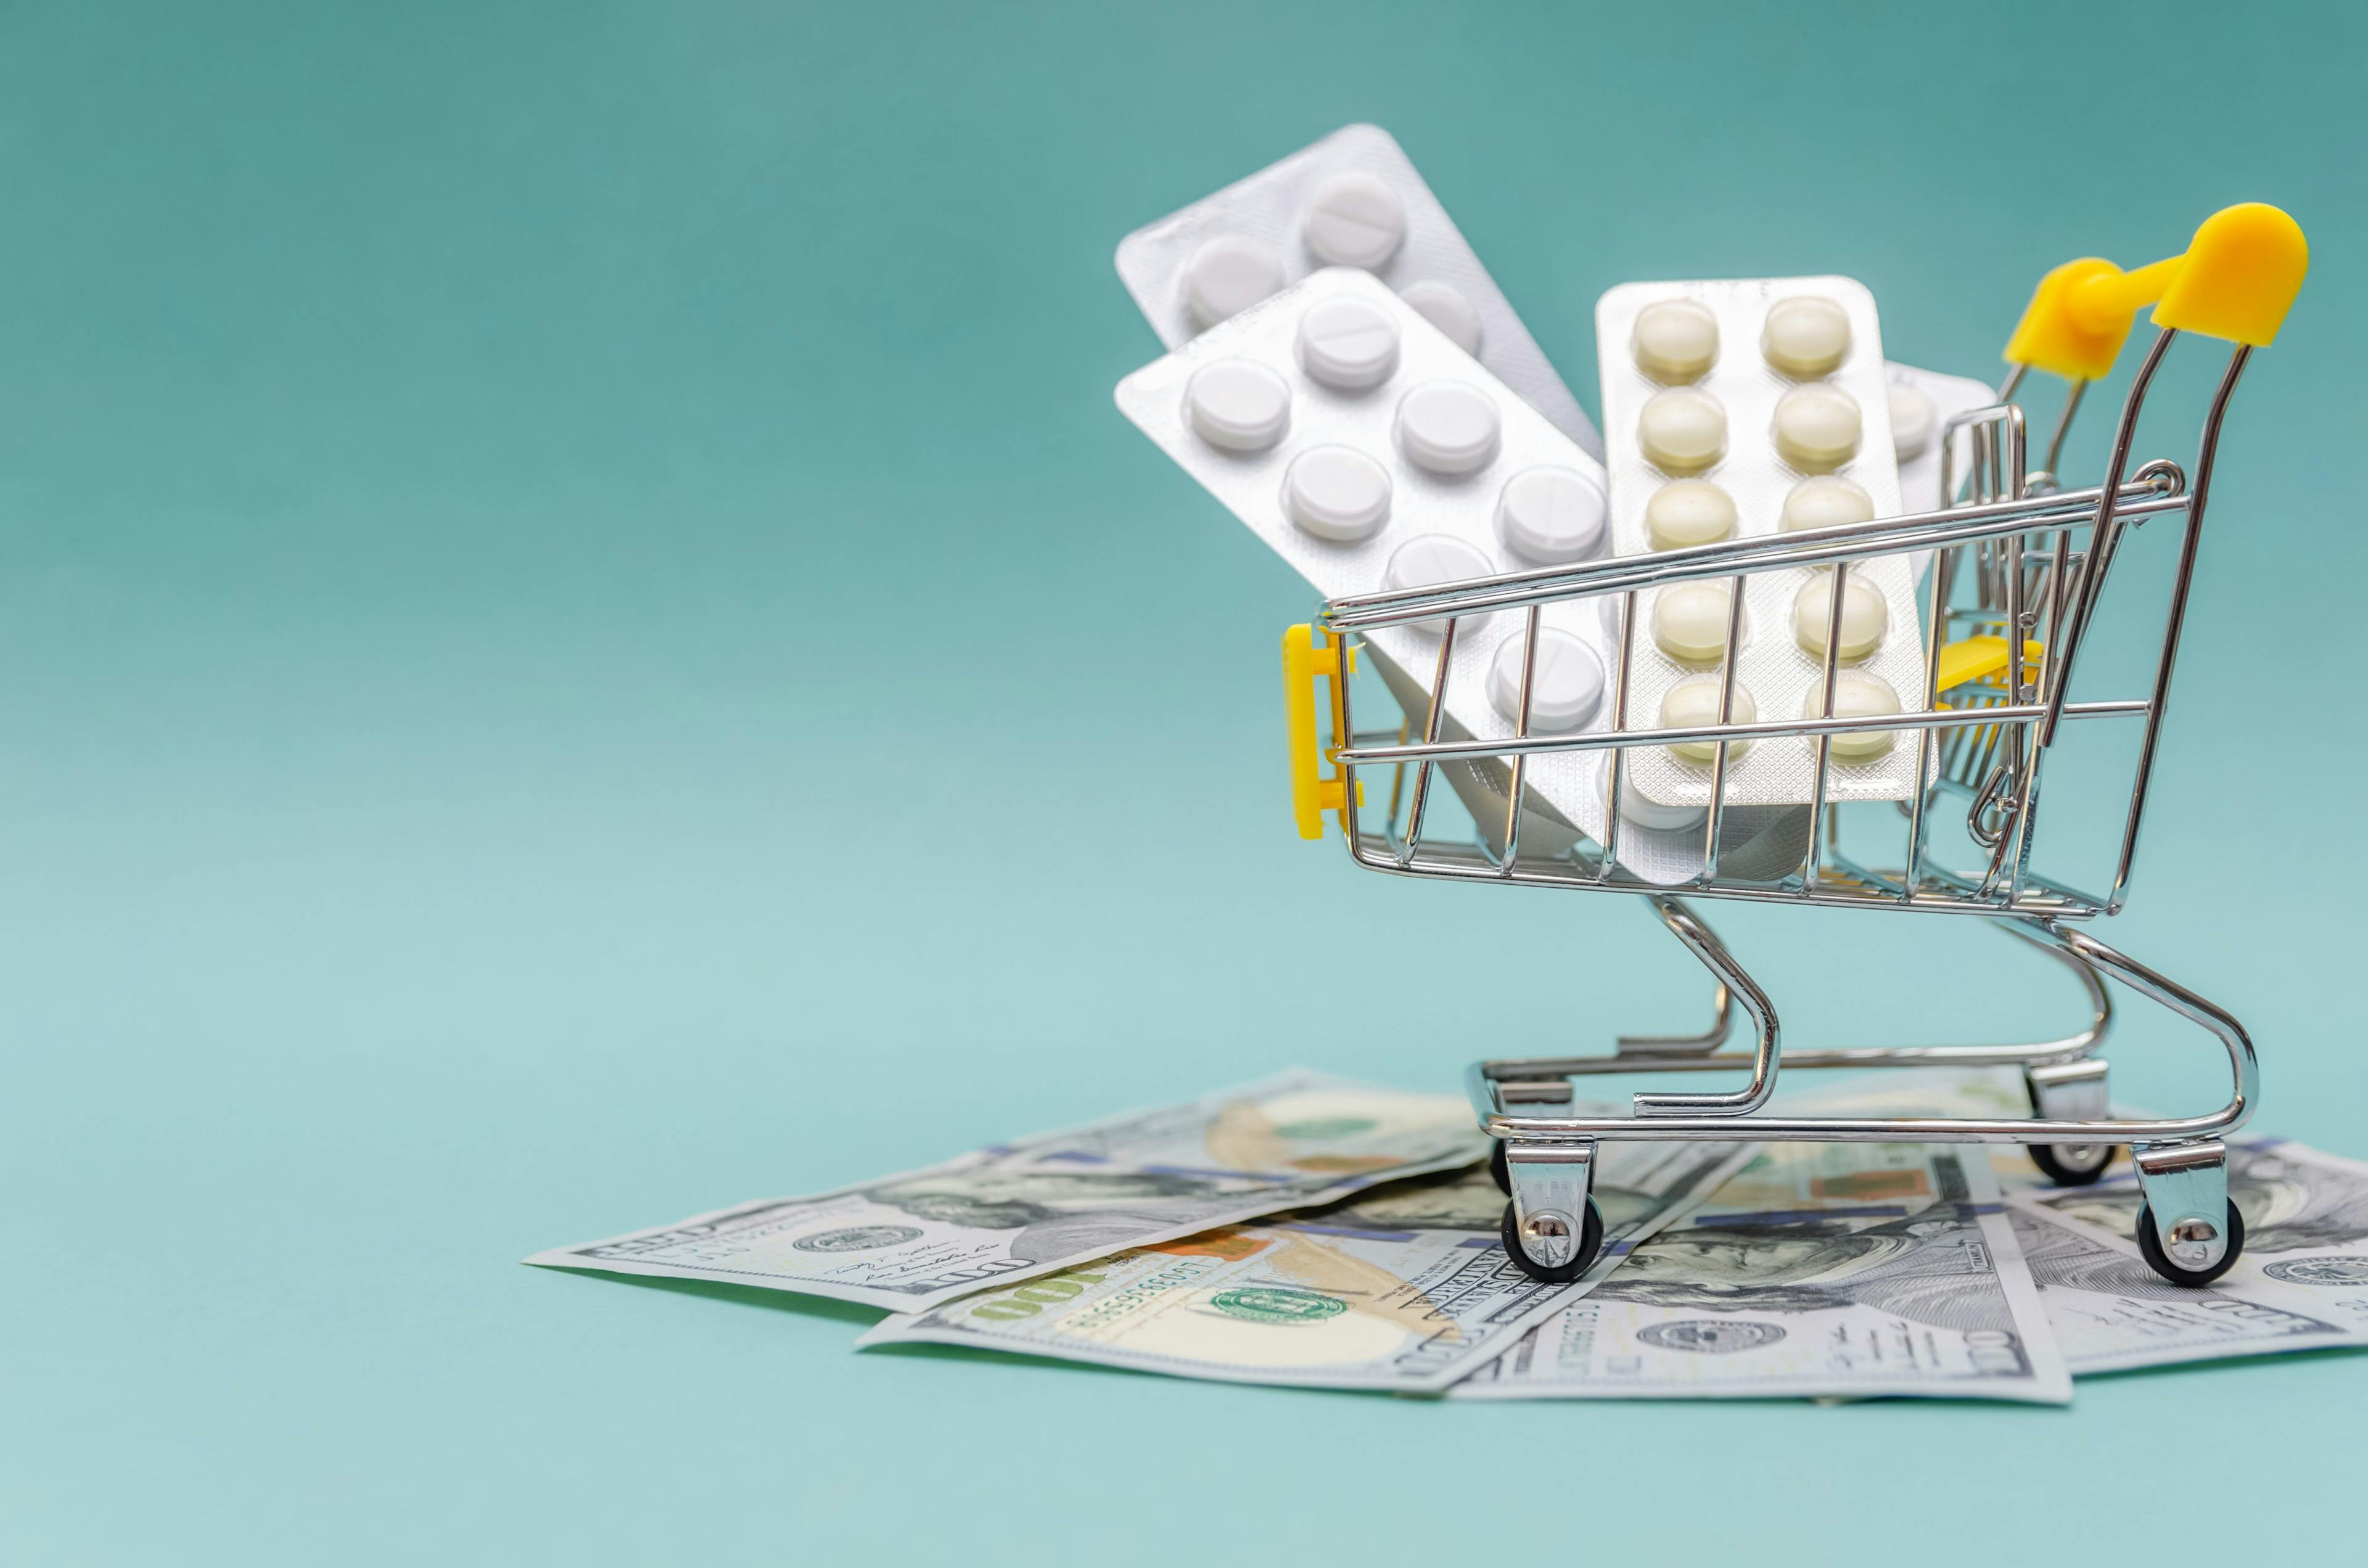 Independent Pharmacies Continue to Face Financial Hardships as the Clock Ticks on PBM Reform